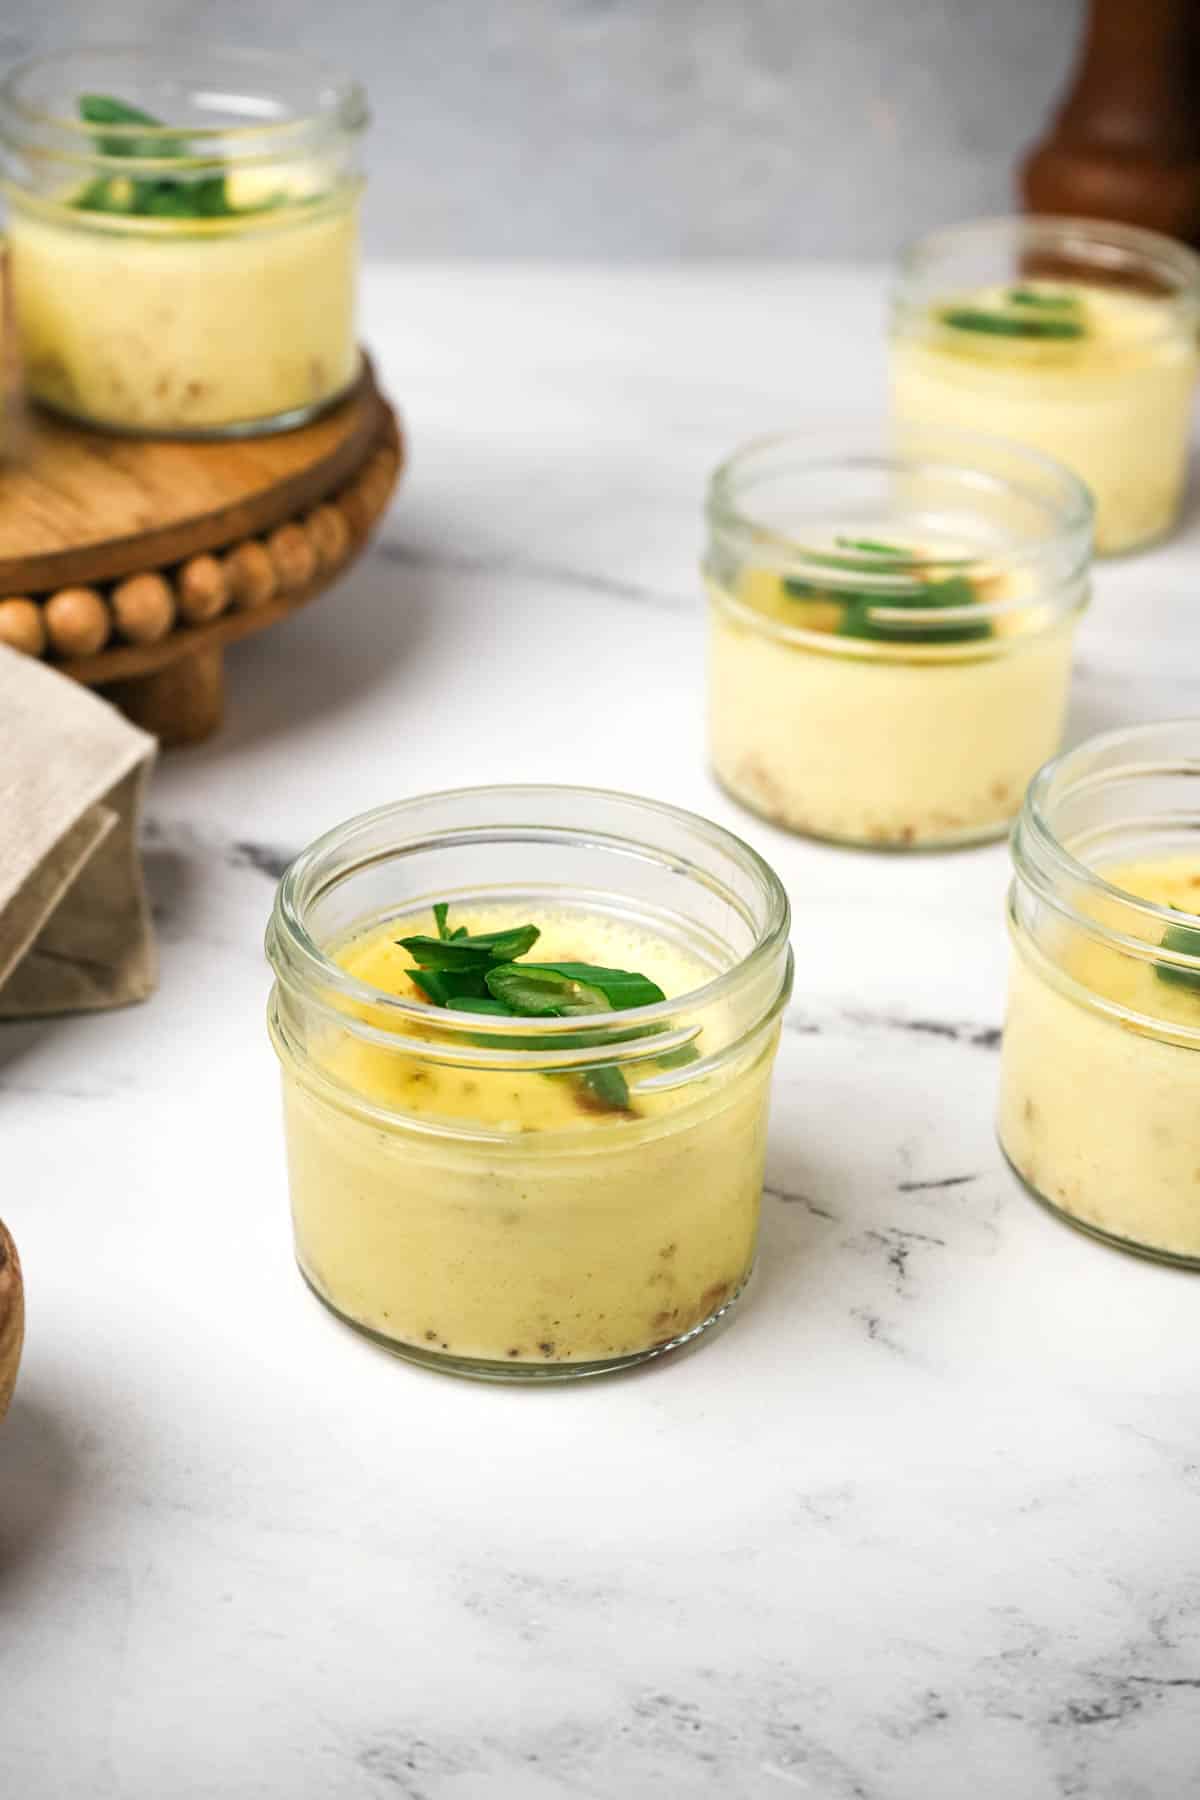 jars filled with yellow cooked egg and green garnishes